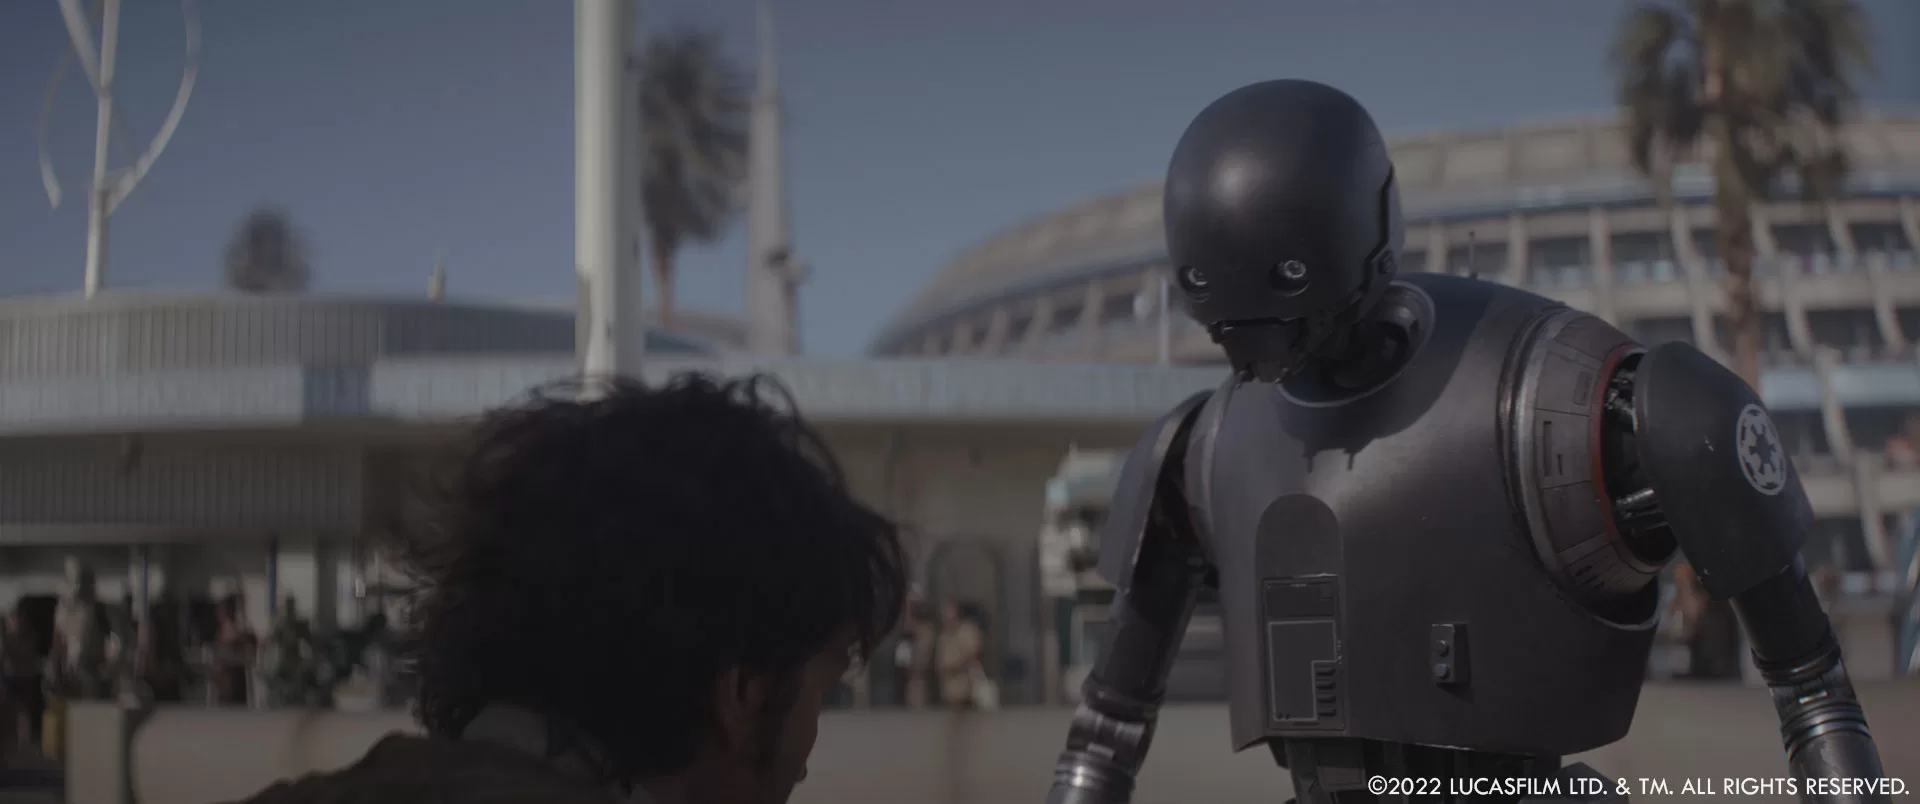 industrial light and magic gives a behind-the-scenes look into rogue one